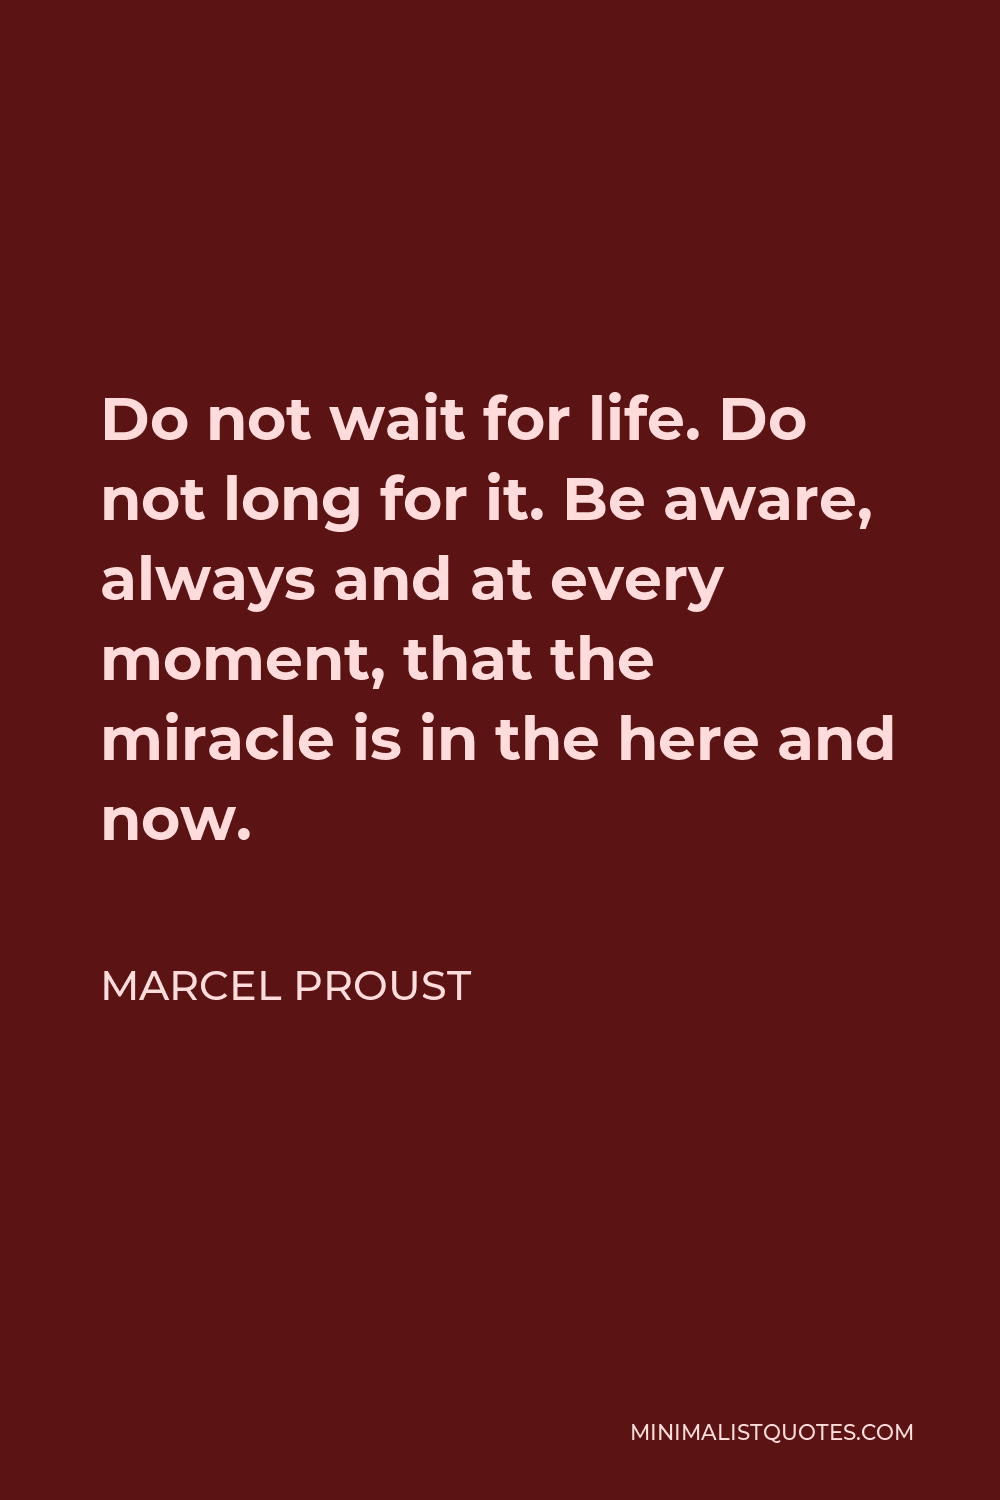 Marcel Proust Quote - Do not wait for life. Do not long for it. Be aware, always and at every moment, that the miracle is in the here and now.